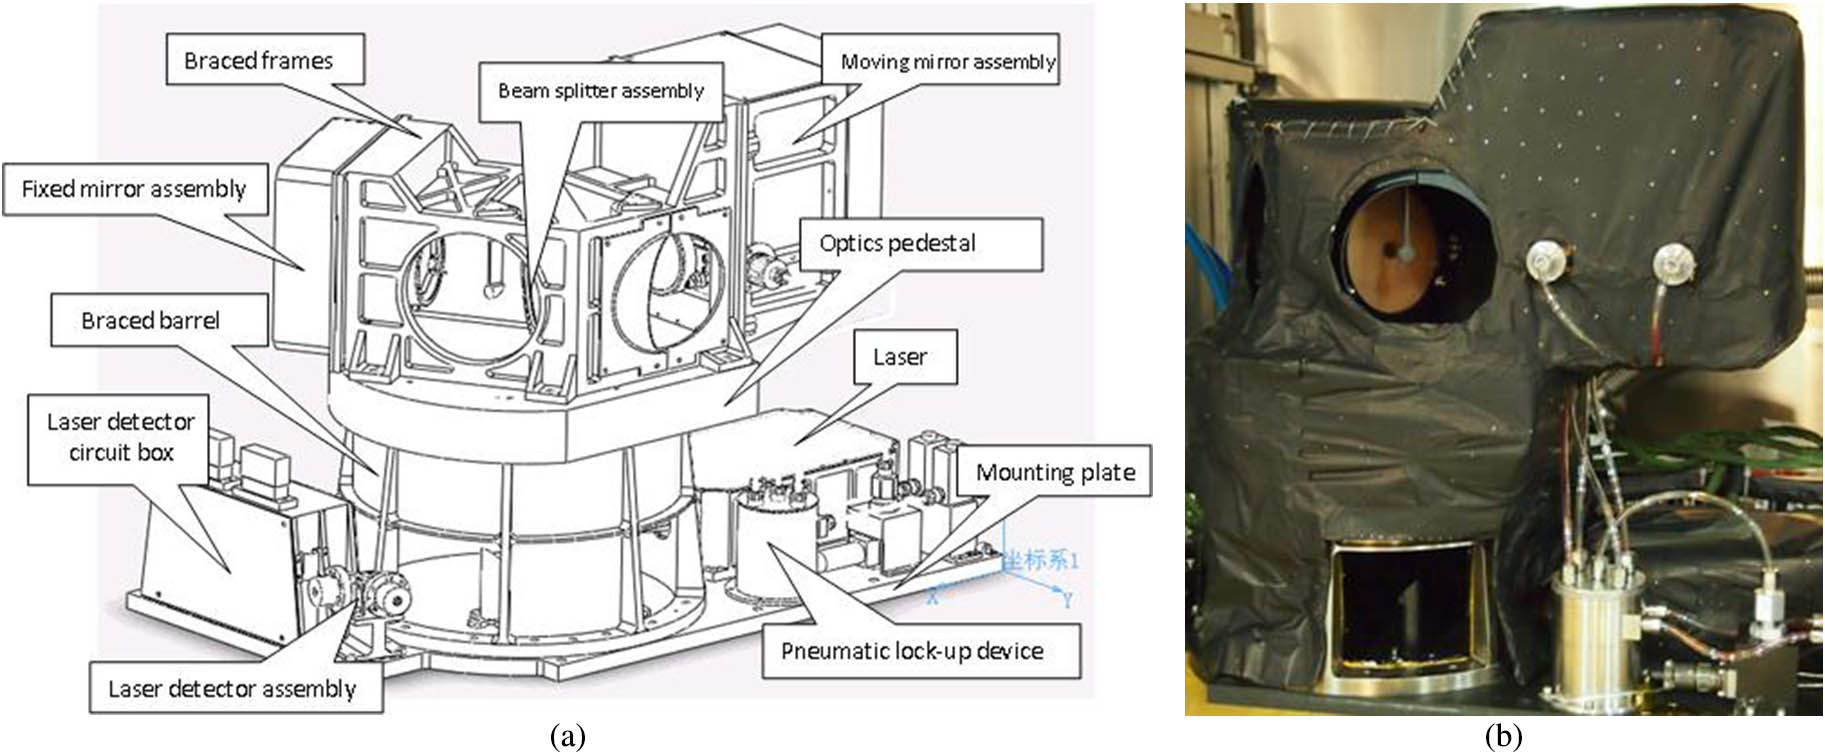 (a) Mechanical assembly drawing and (b) interferometer product.